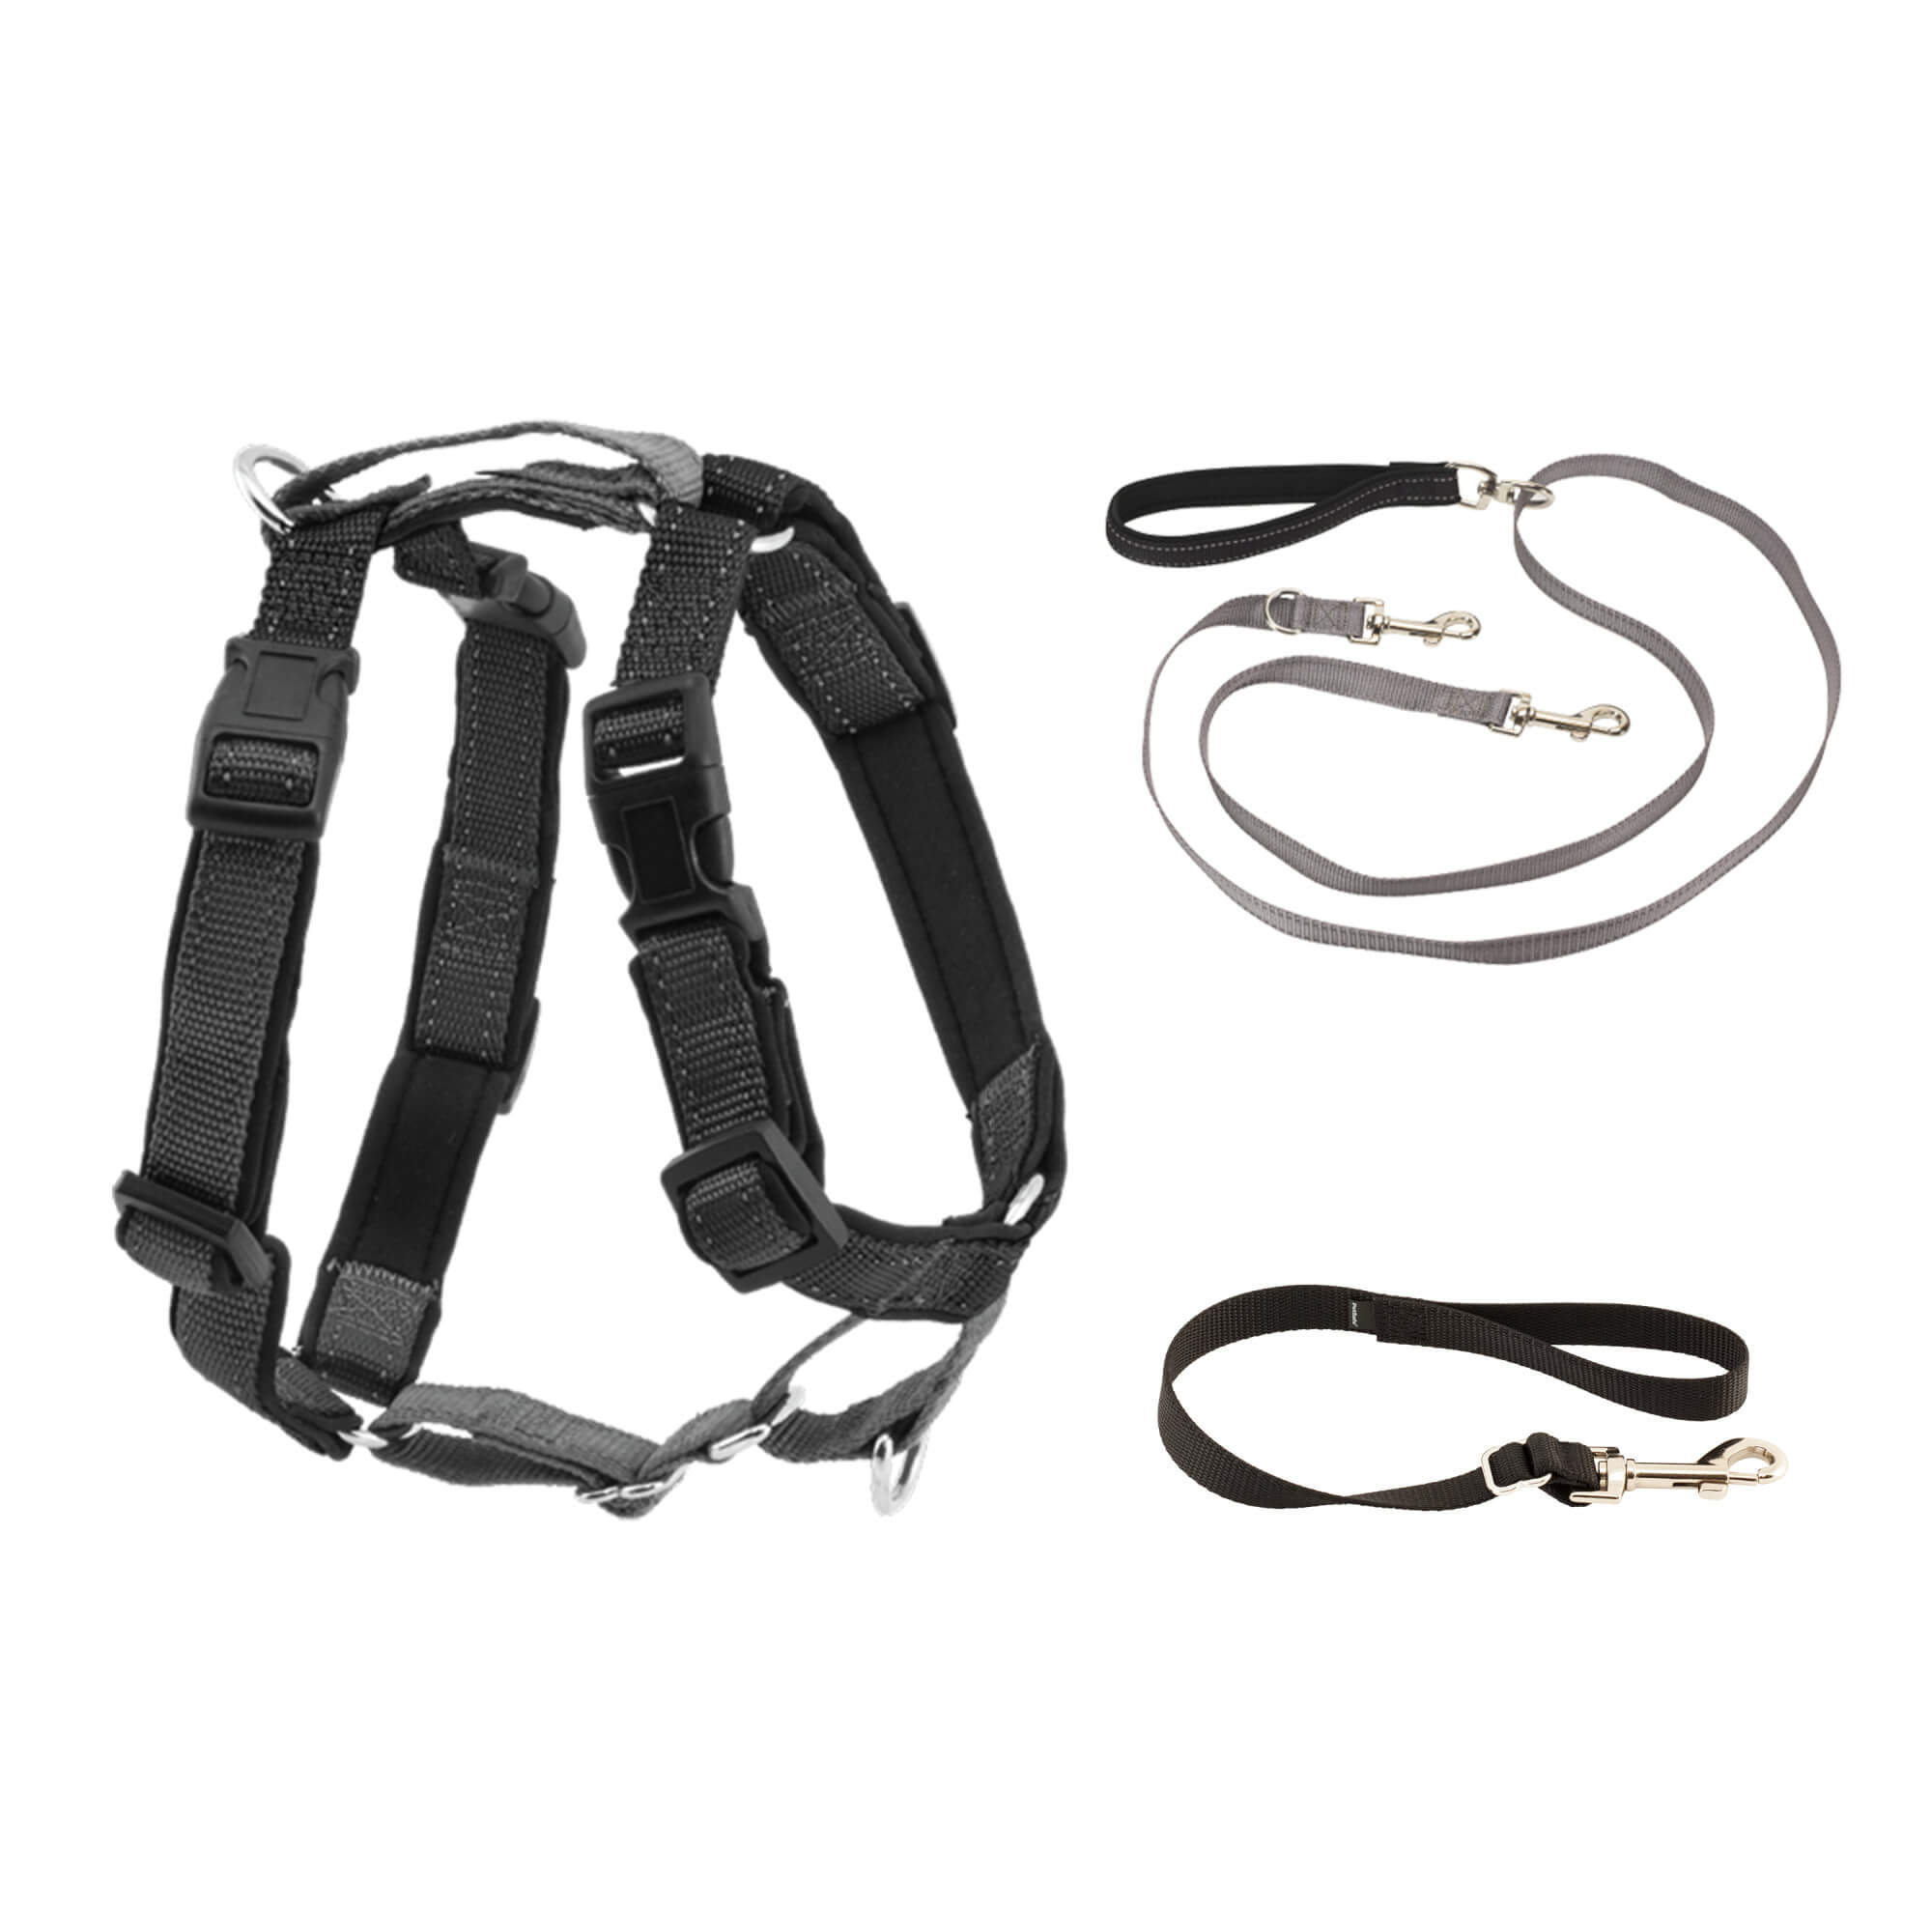 PetSafe 3 in 1 black dog harness with leash attachments